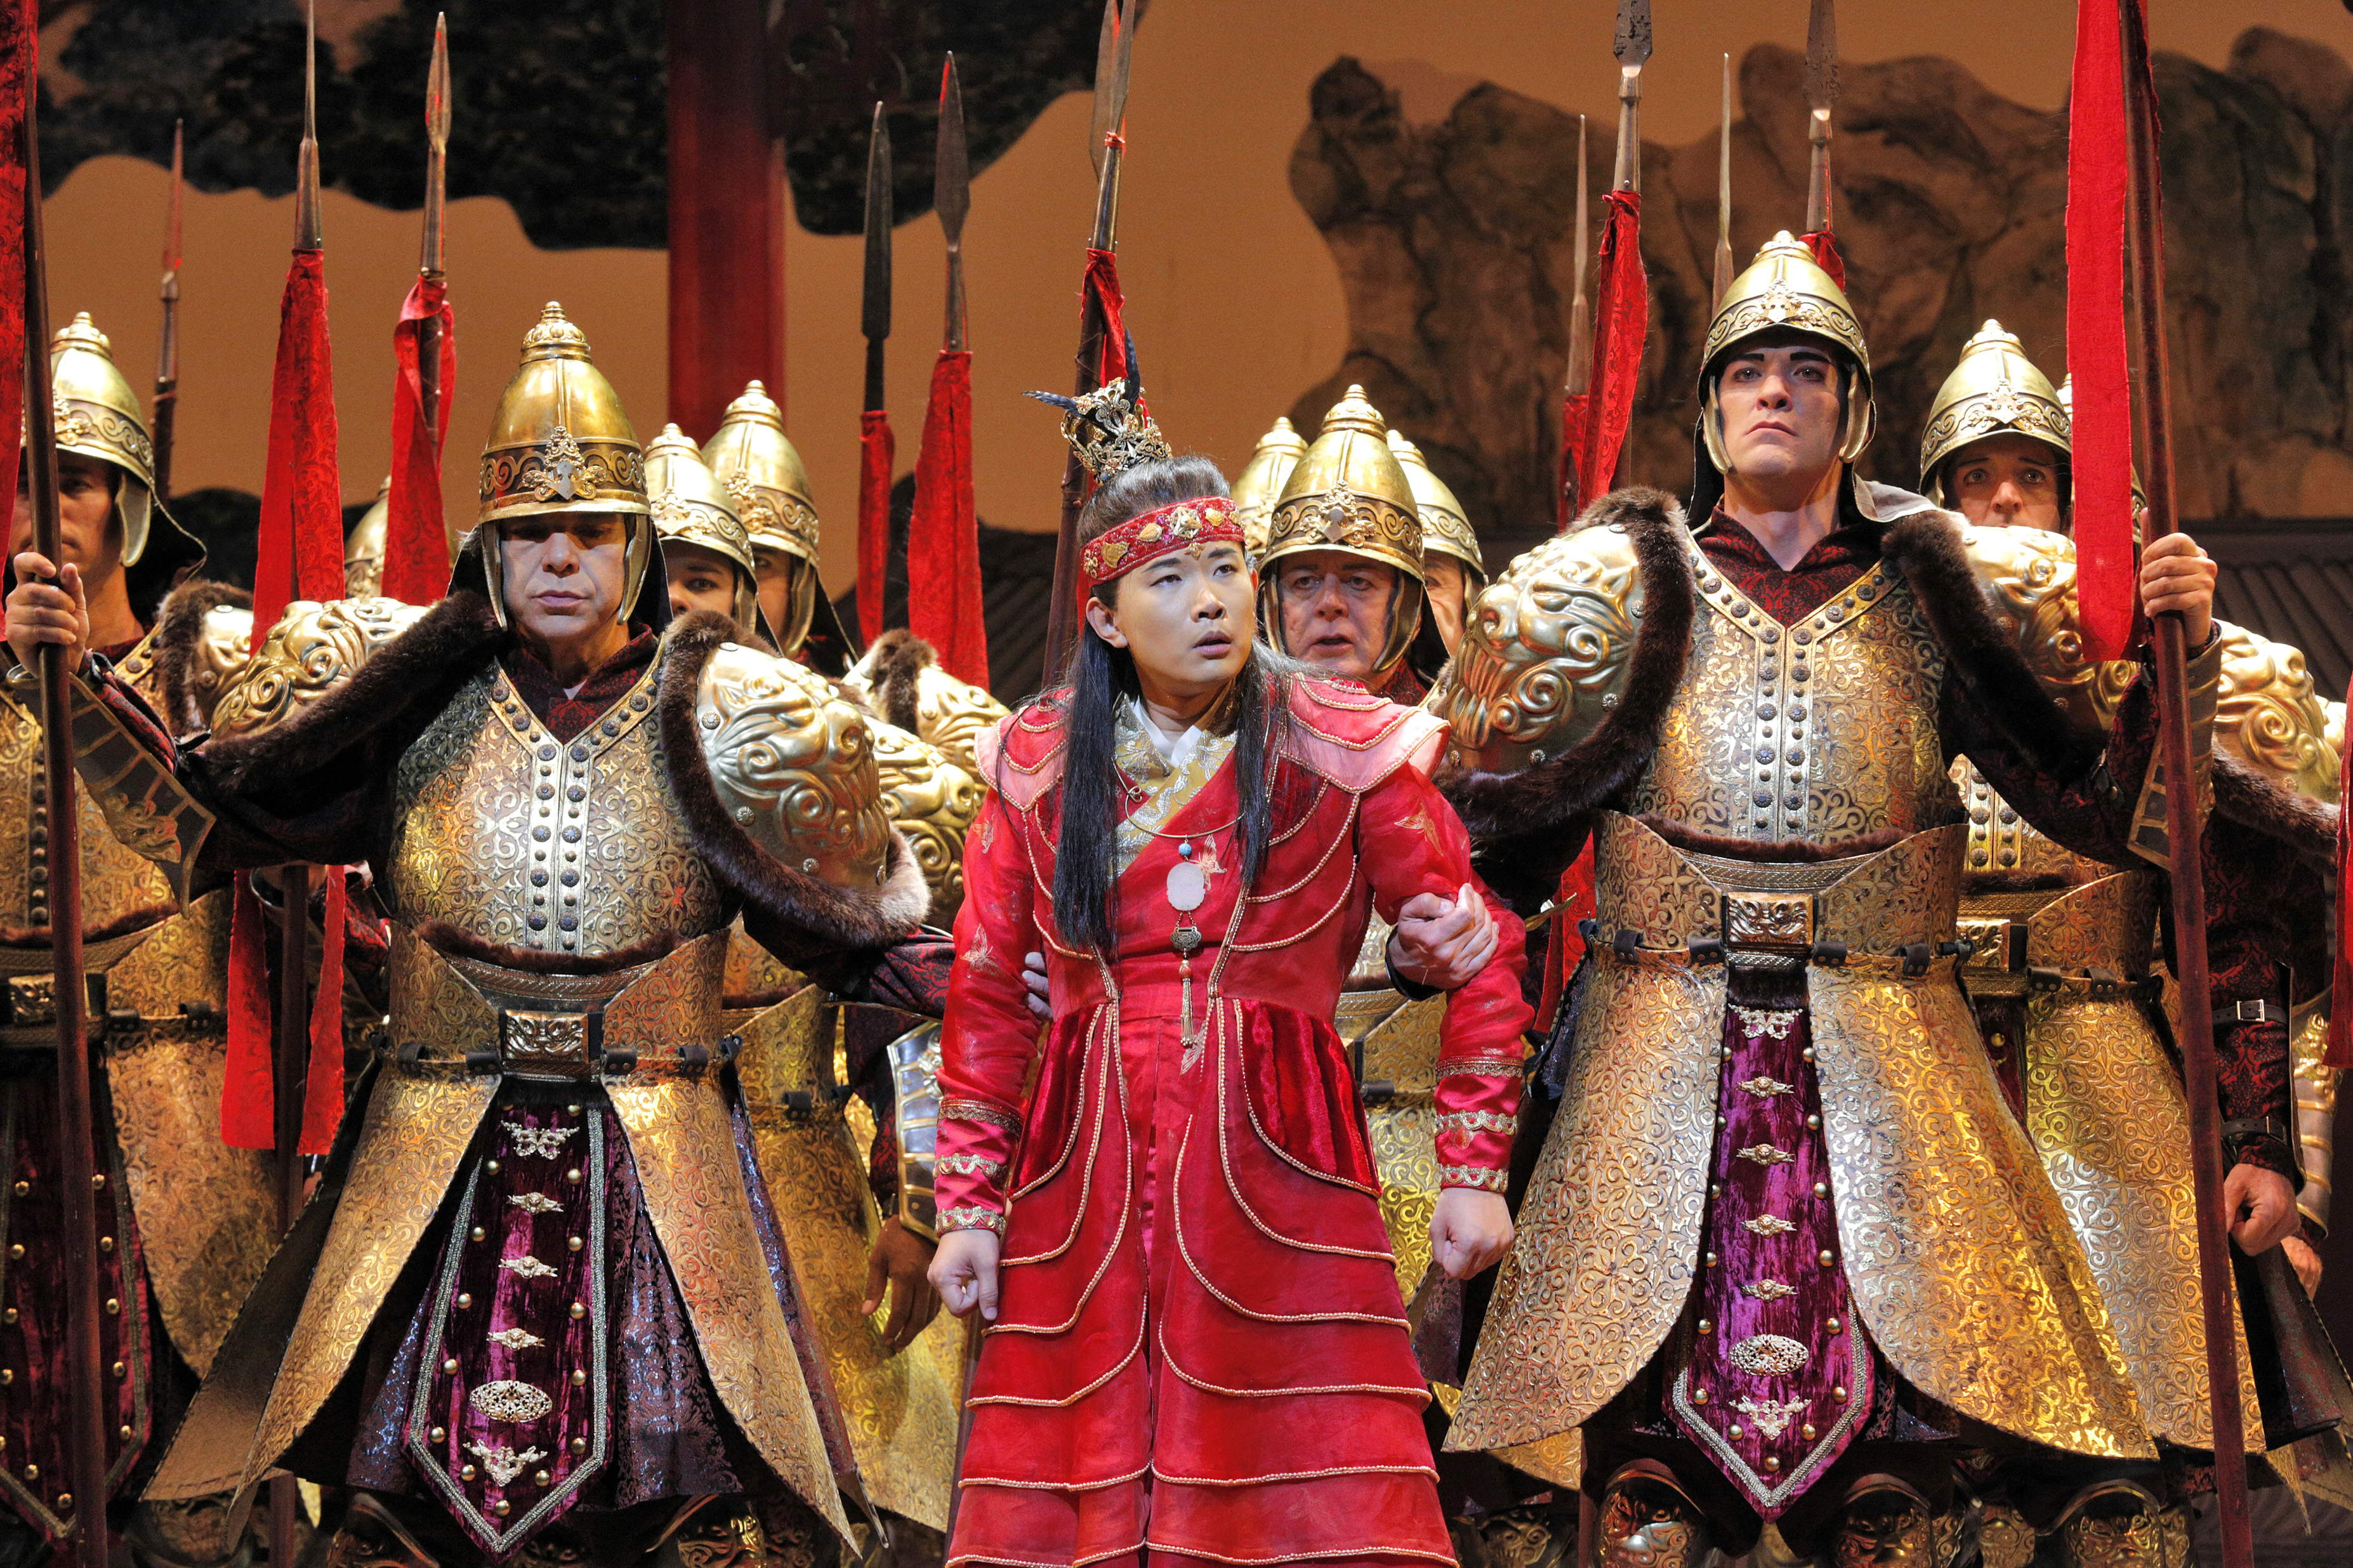 A person in red historical attire and a crown stands, looking surprised, surrounded by armed soldiers in ornate gold armor holding spears with red tassels.